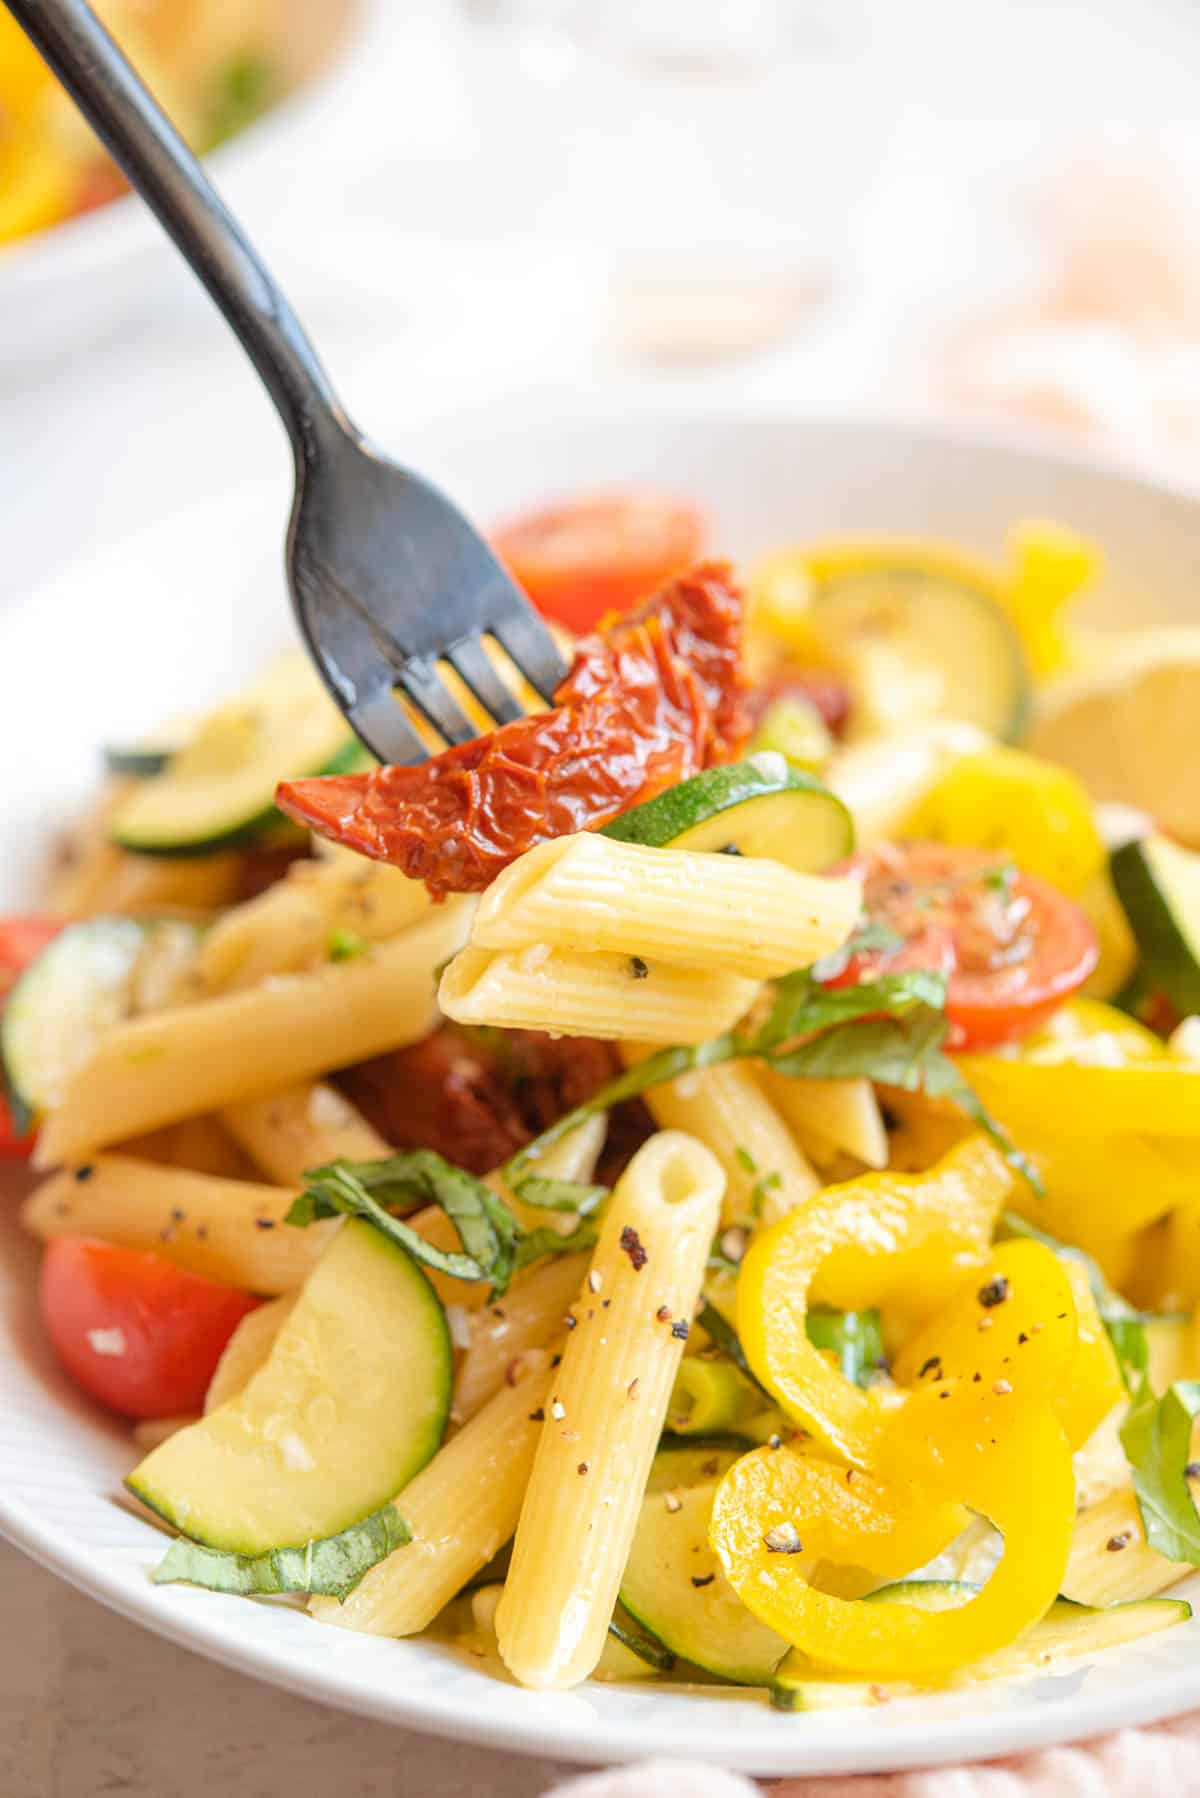 A close up of pasta and vegetables on a fork